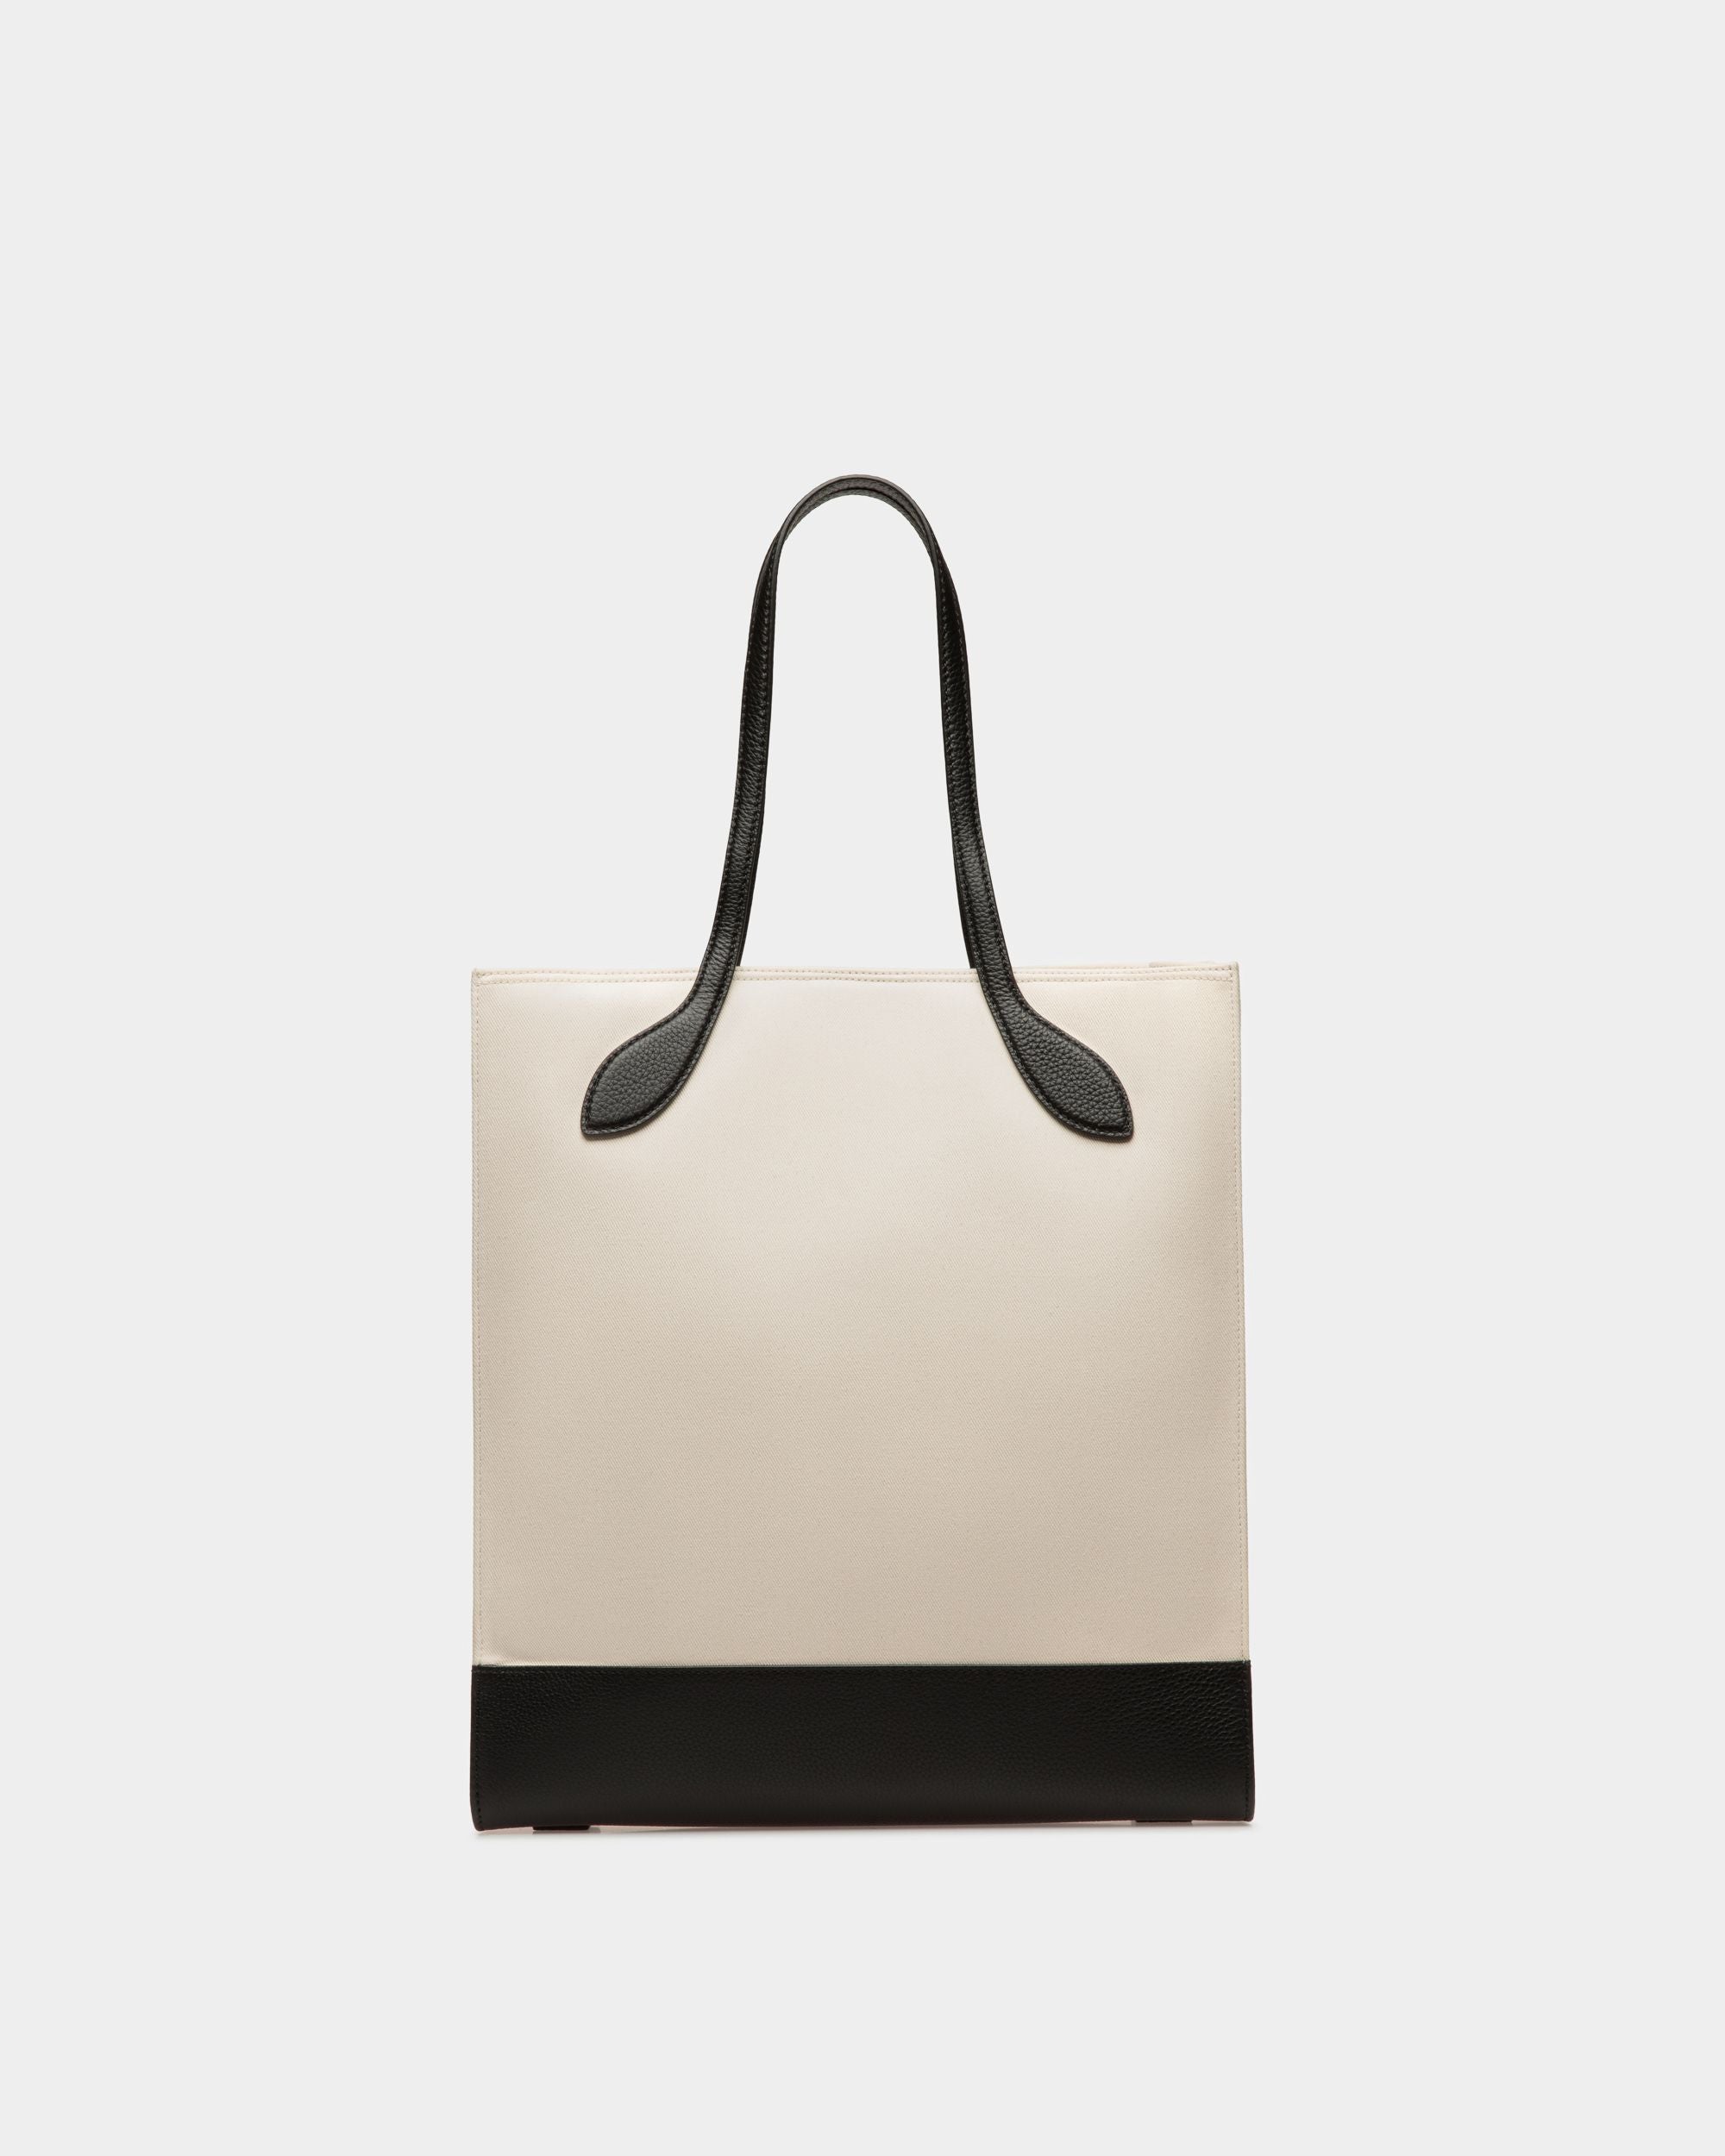 Keep On | Women's Tote Bag | Natural And Black Fabric | Bally | Still Life Back